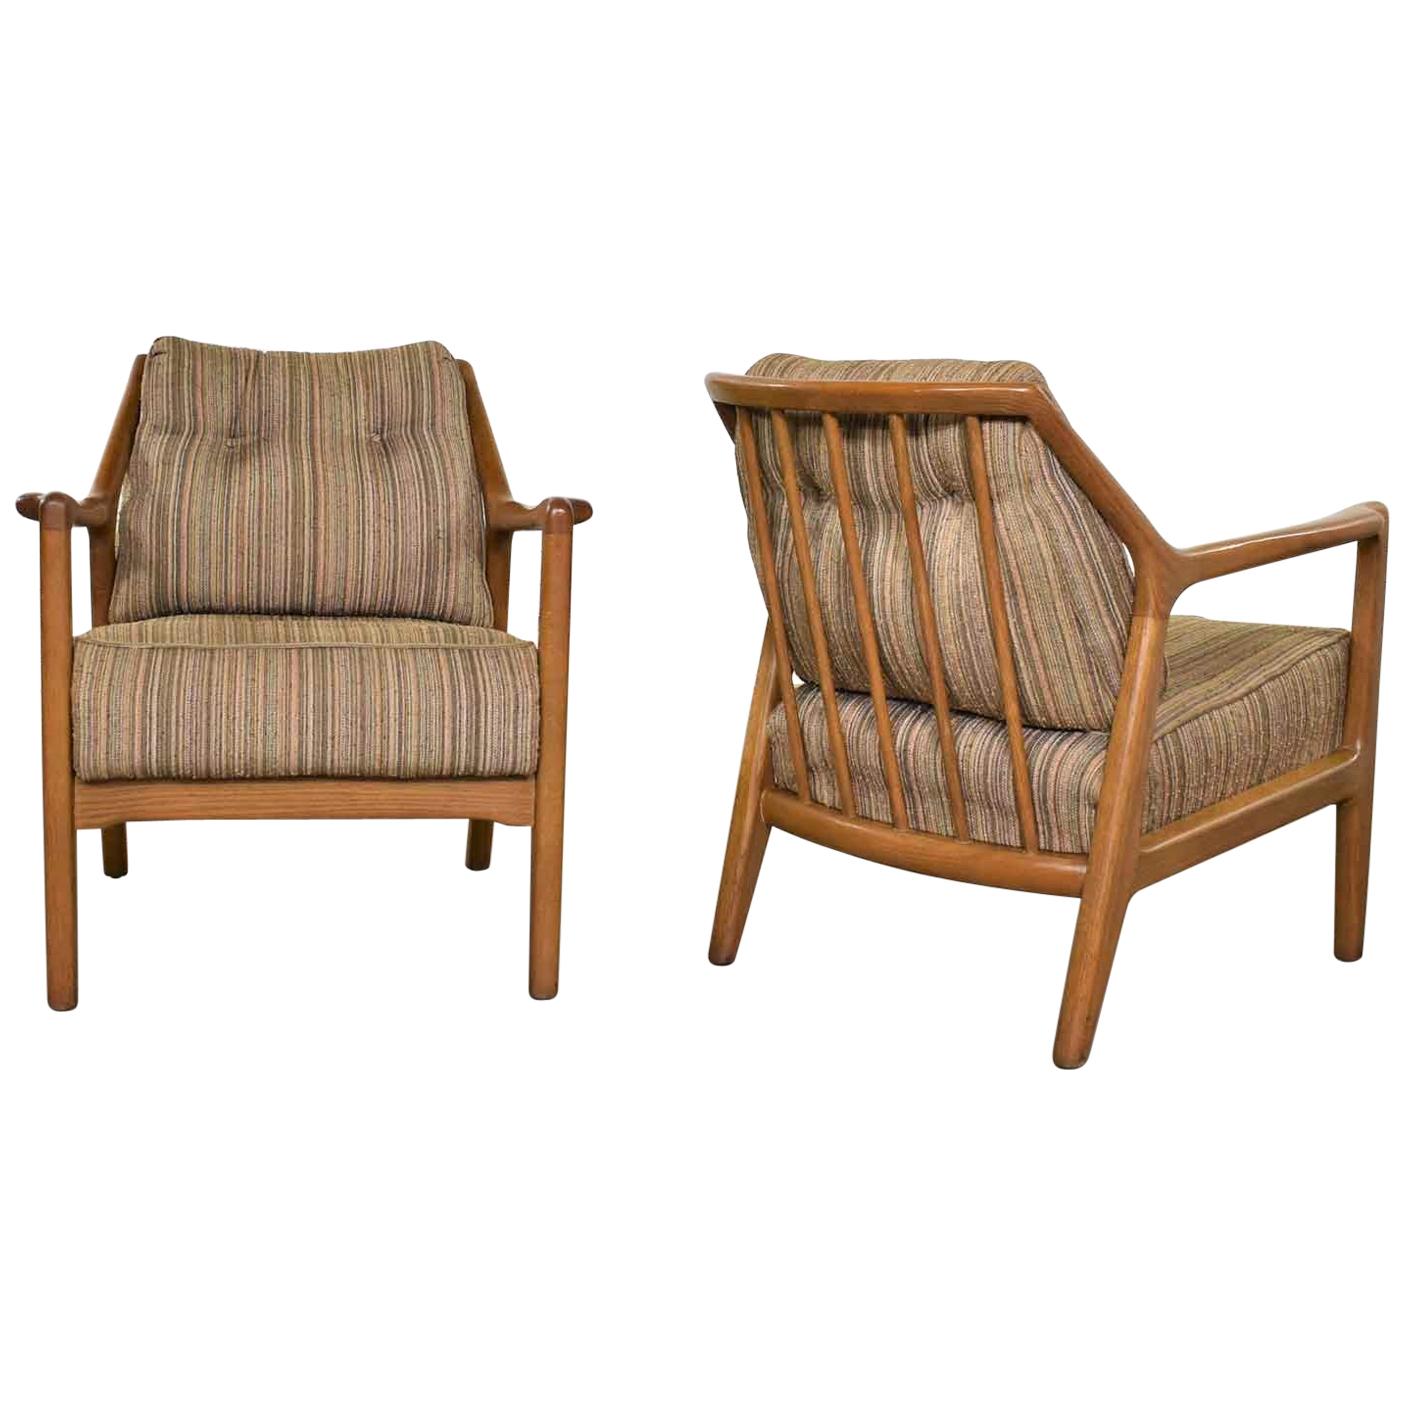 Pair of Ash Group Spindle Back Chairs by Jack Van der Molen for Jamestown Lounge